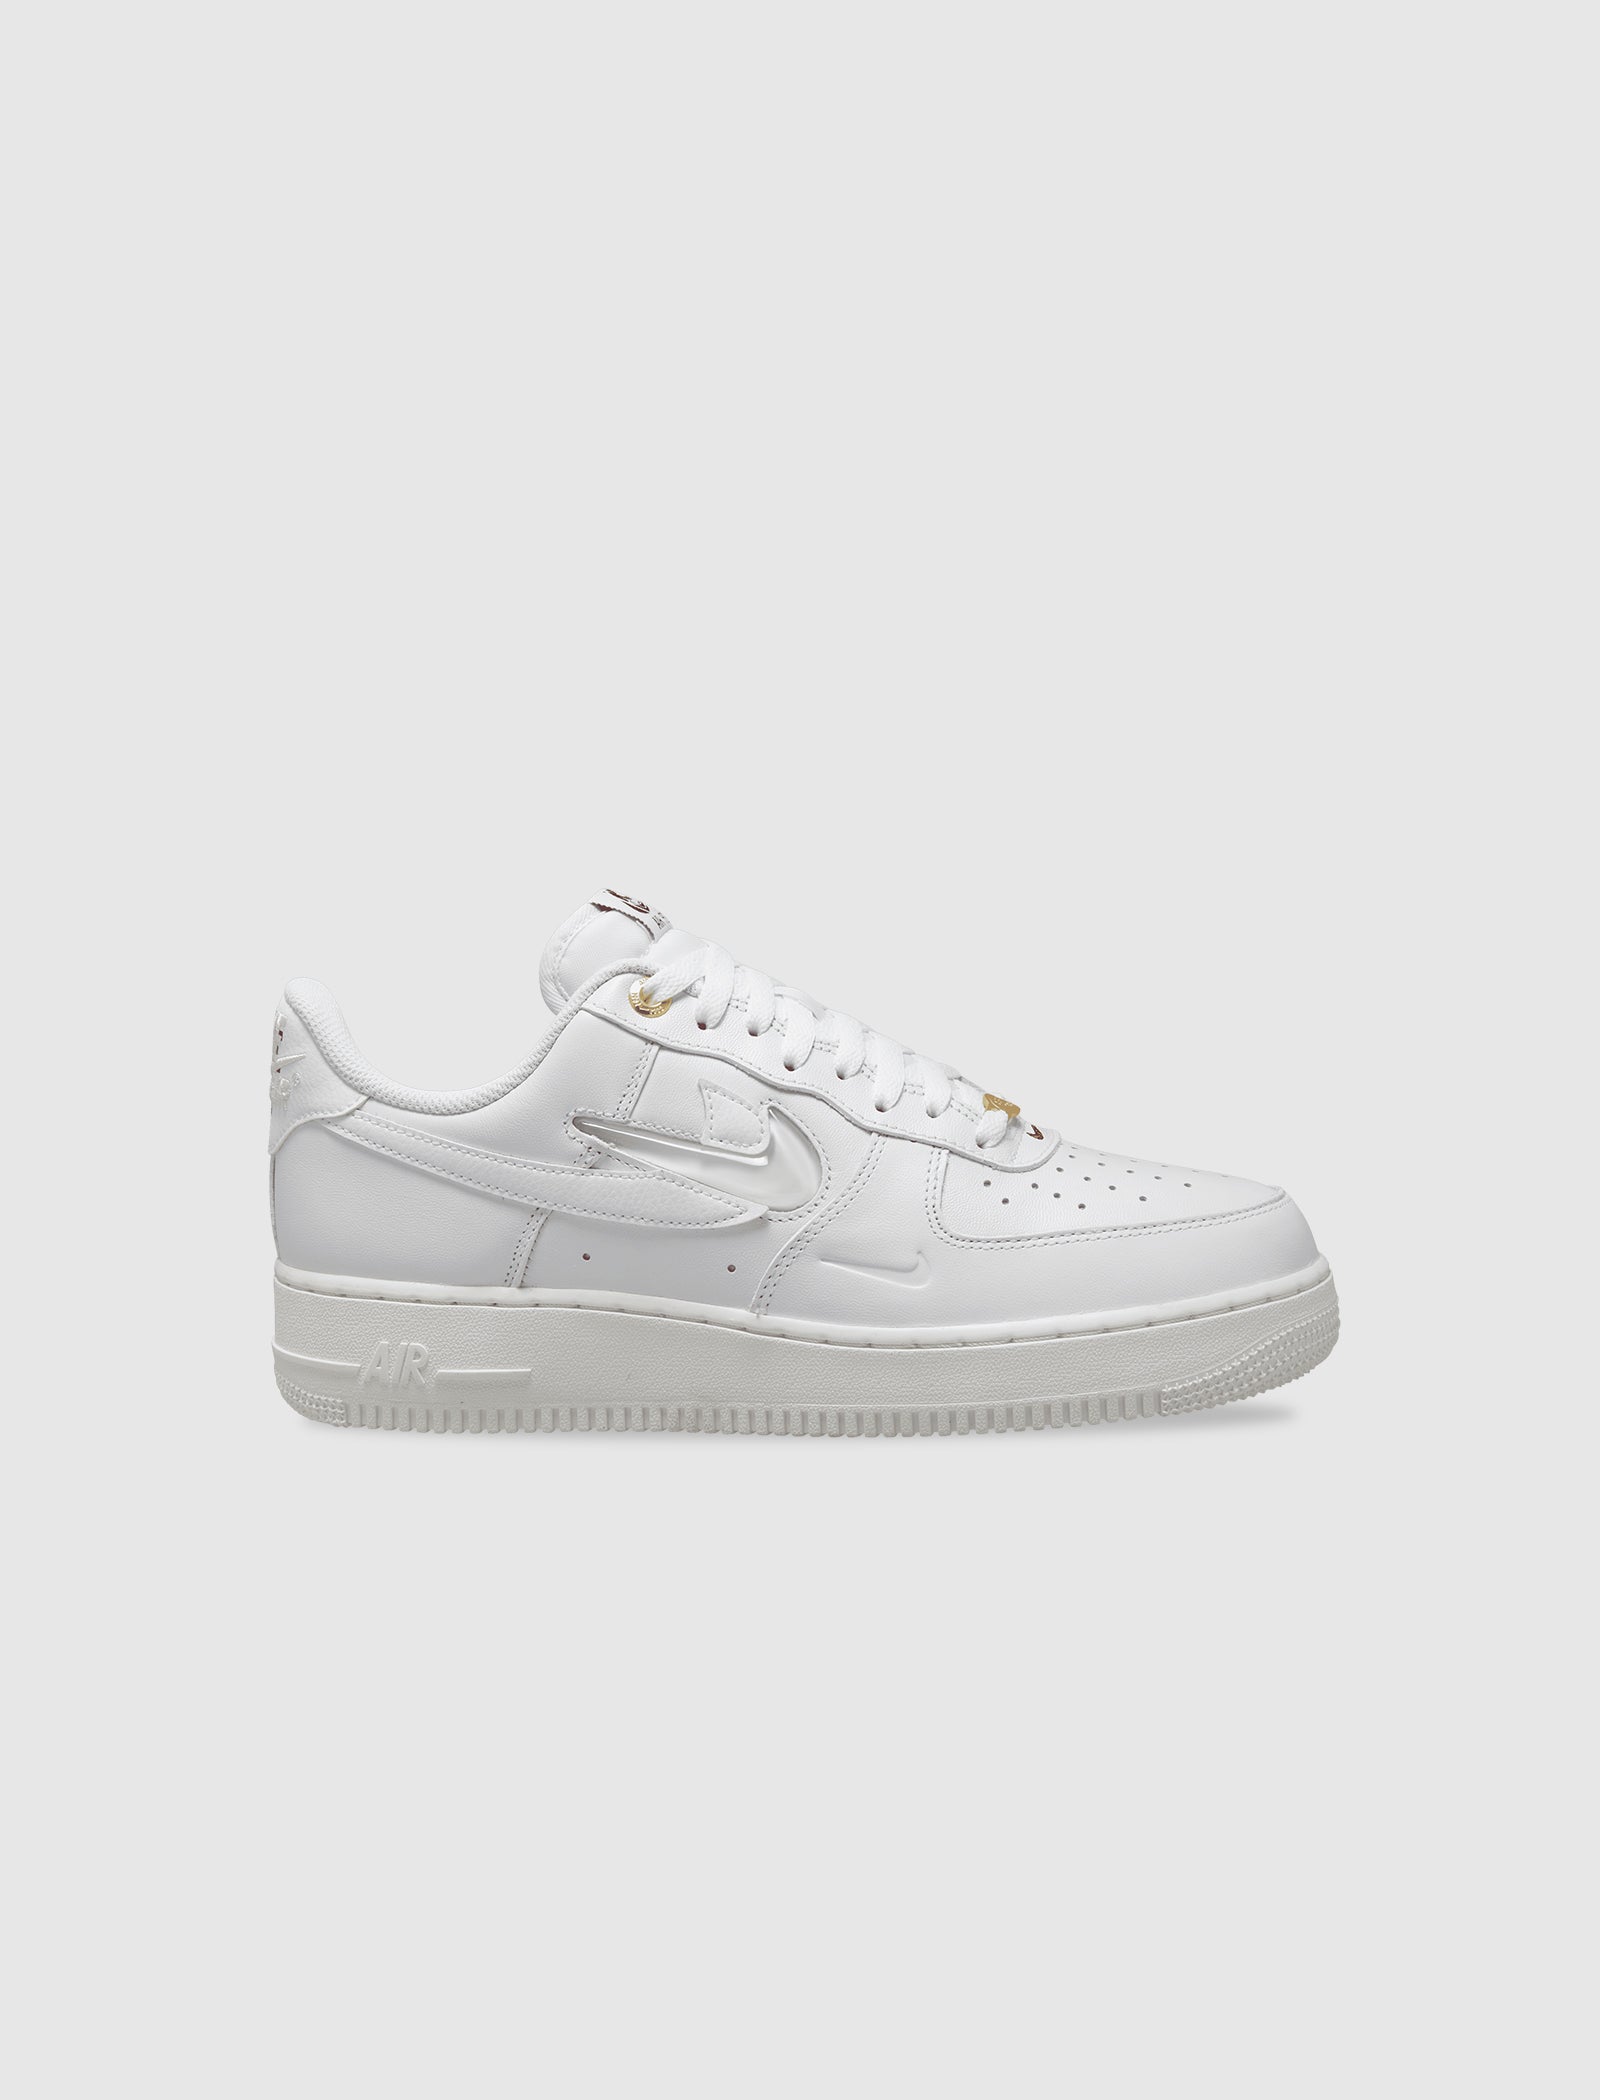 AIR FORCE 1 '07 PRM "JOIN FORCES"